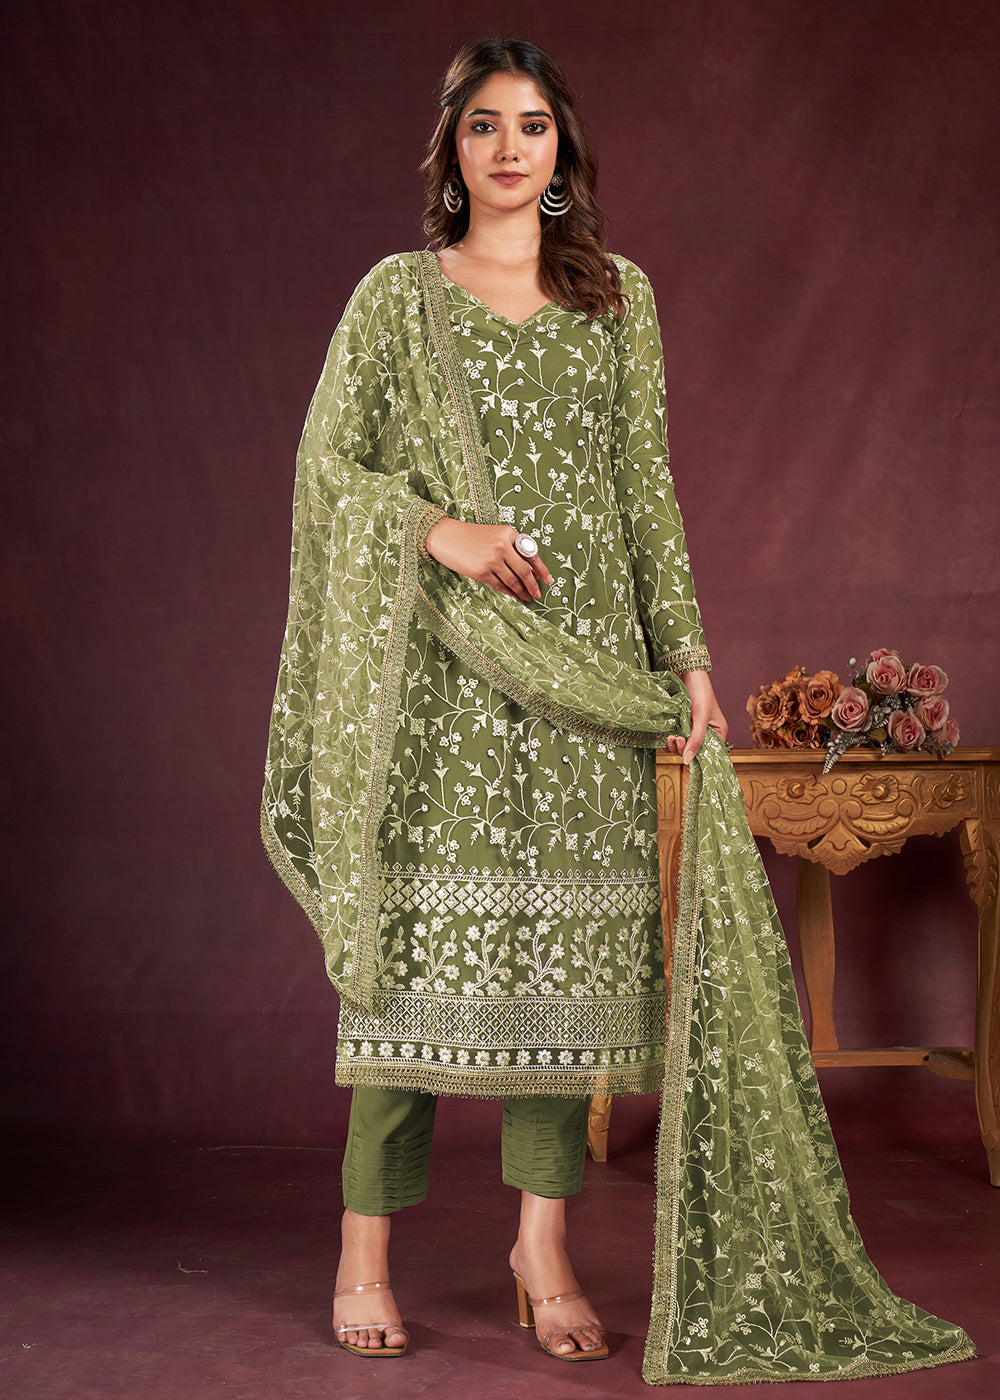 Buy Now Green Butterfly Net Embroidered Festive Salwar Suit Online in USA, UK, Canada, Germany, Australia & Worldwide at Empress Clothing.